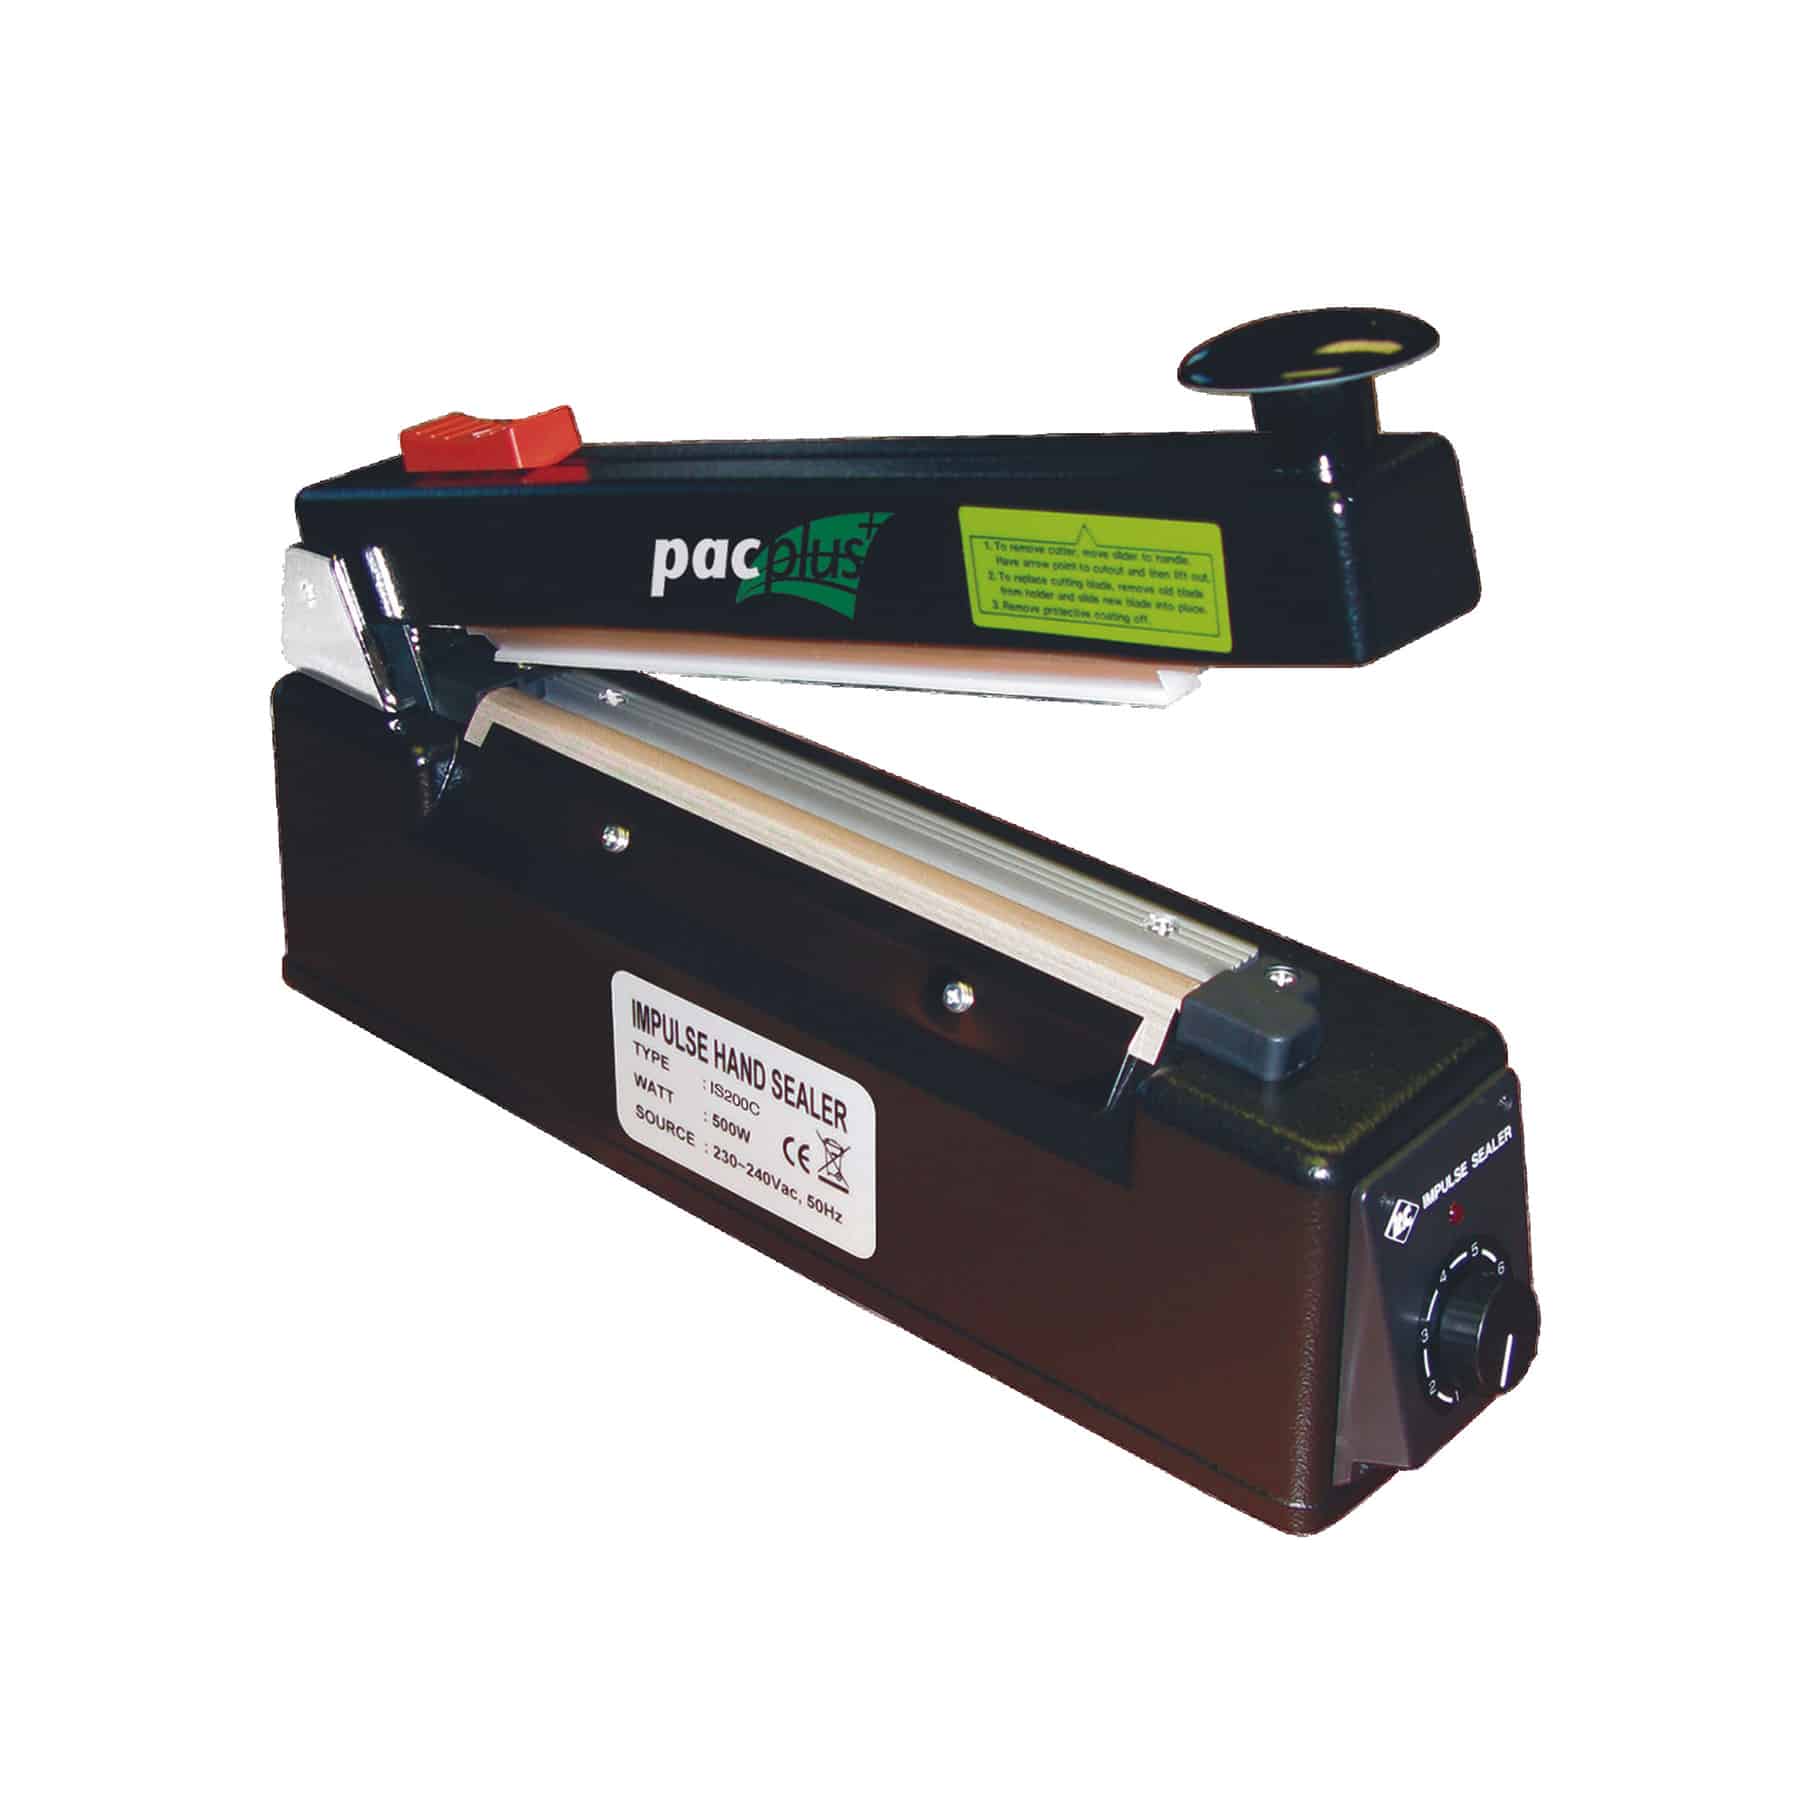 General Purpose Impulse Sealers with Cutter